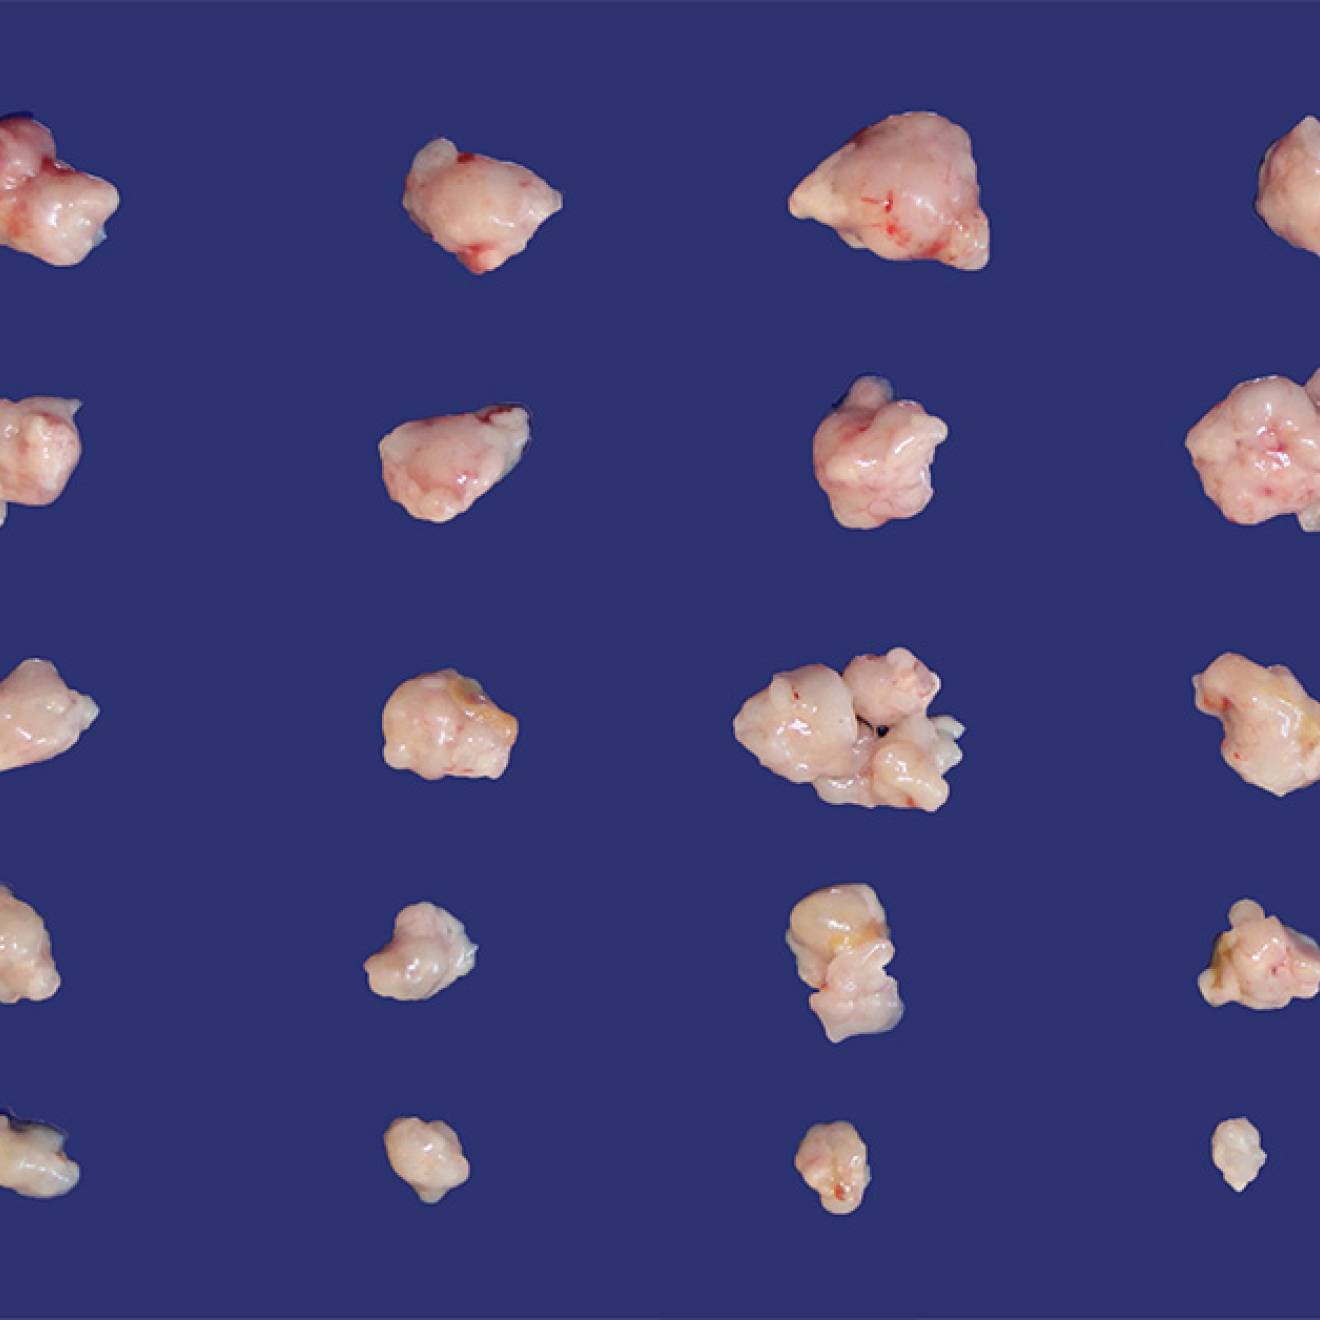 50 small tumors of different sizes, depending on how they are being treated